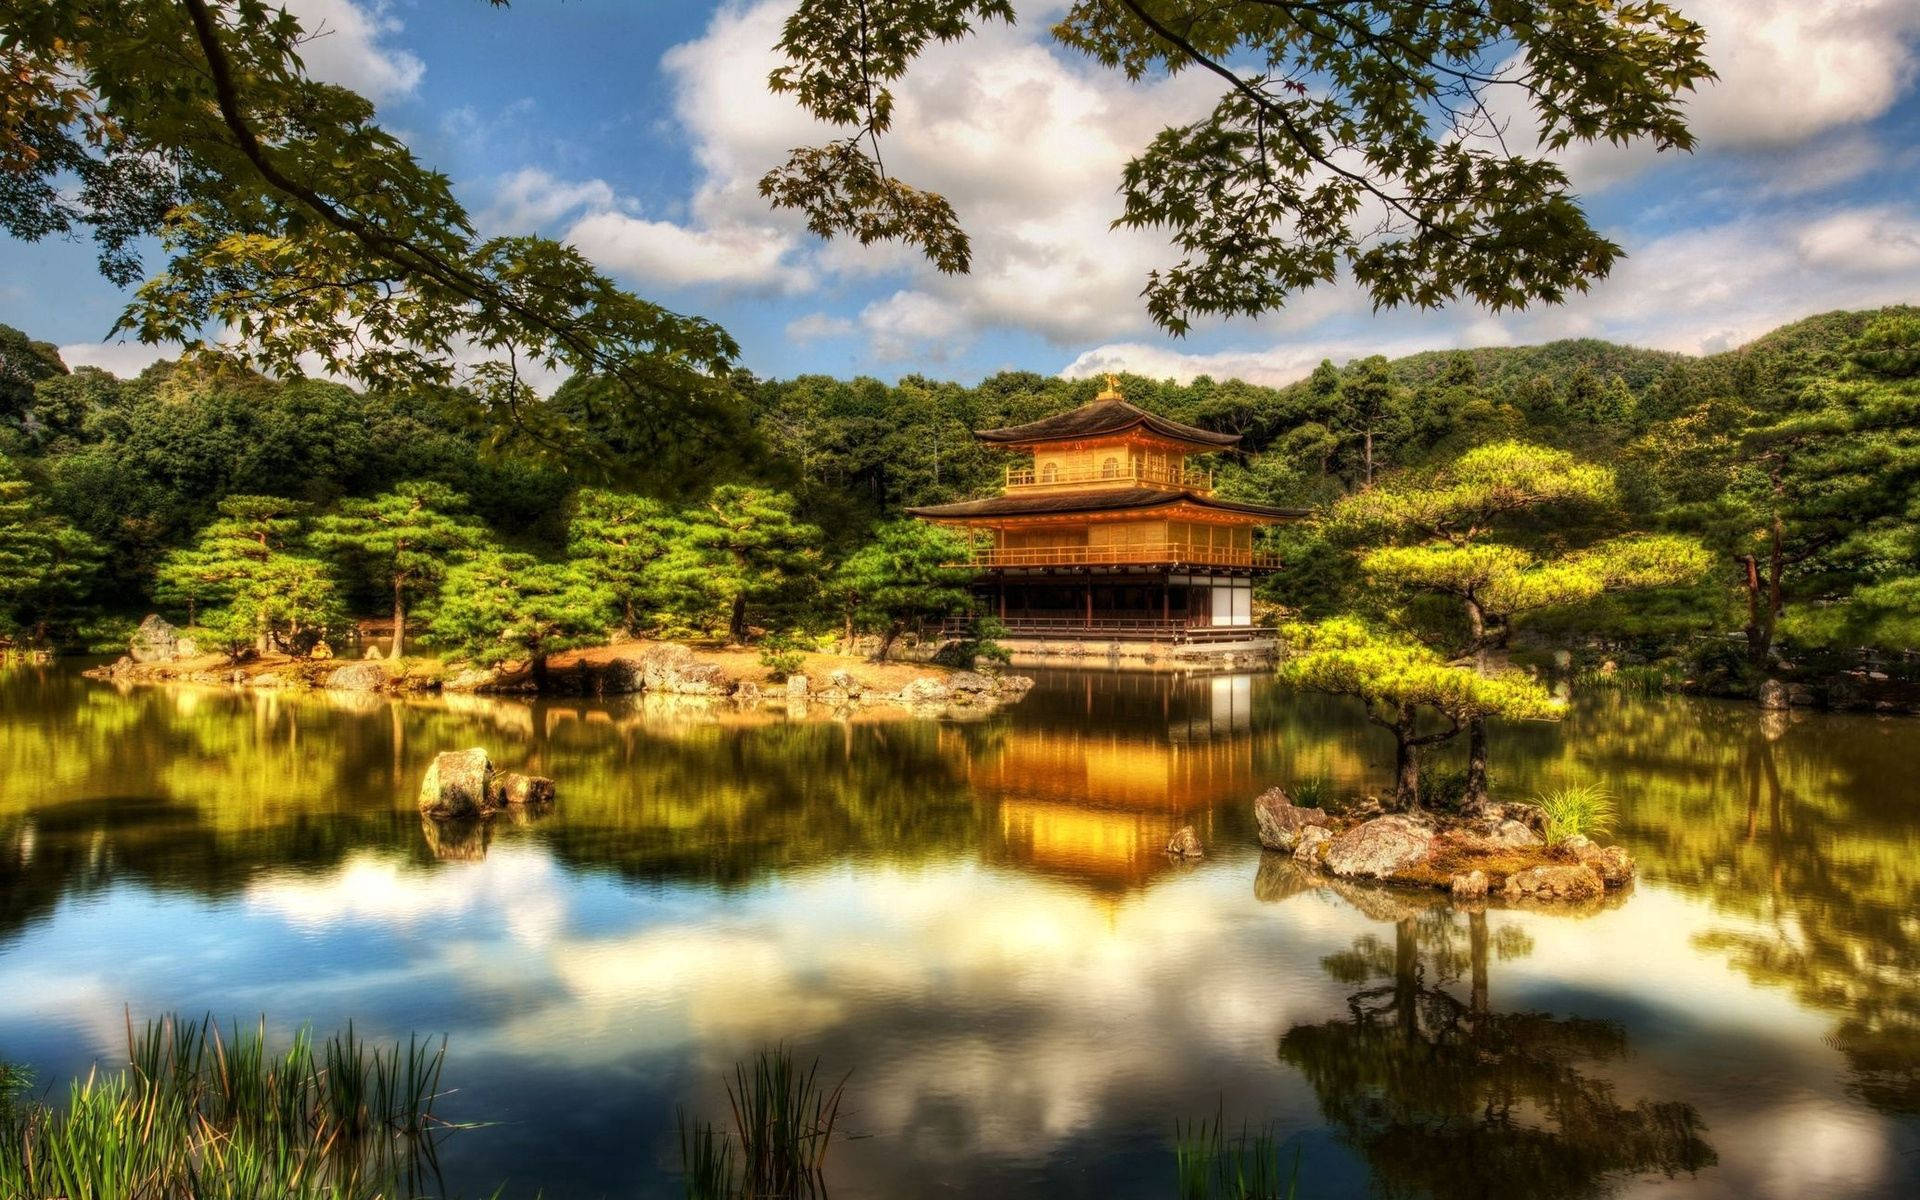 "Golden Pavilion Temple - Serenity in Nature" Wallpaper